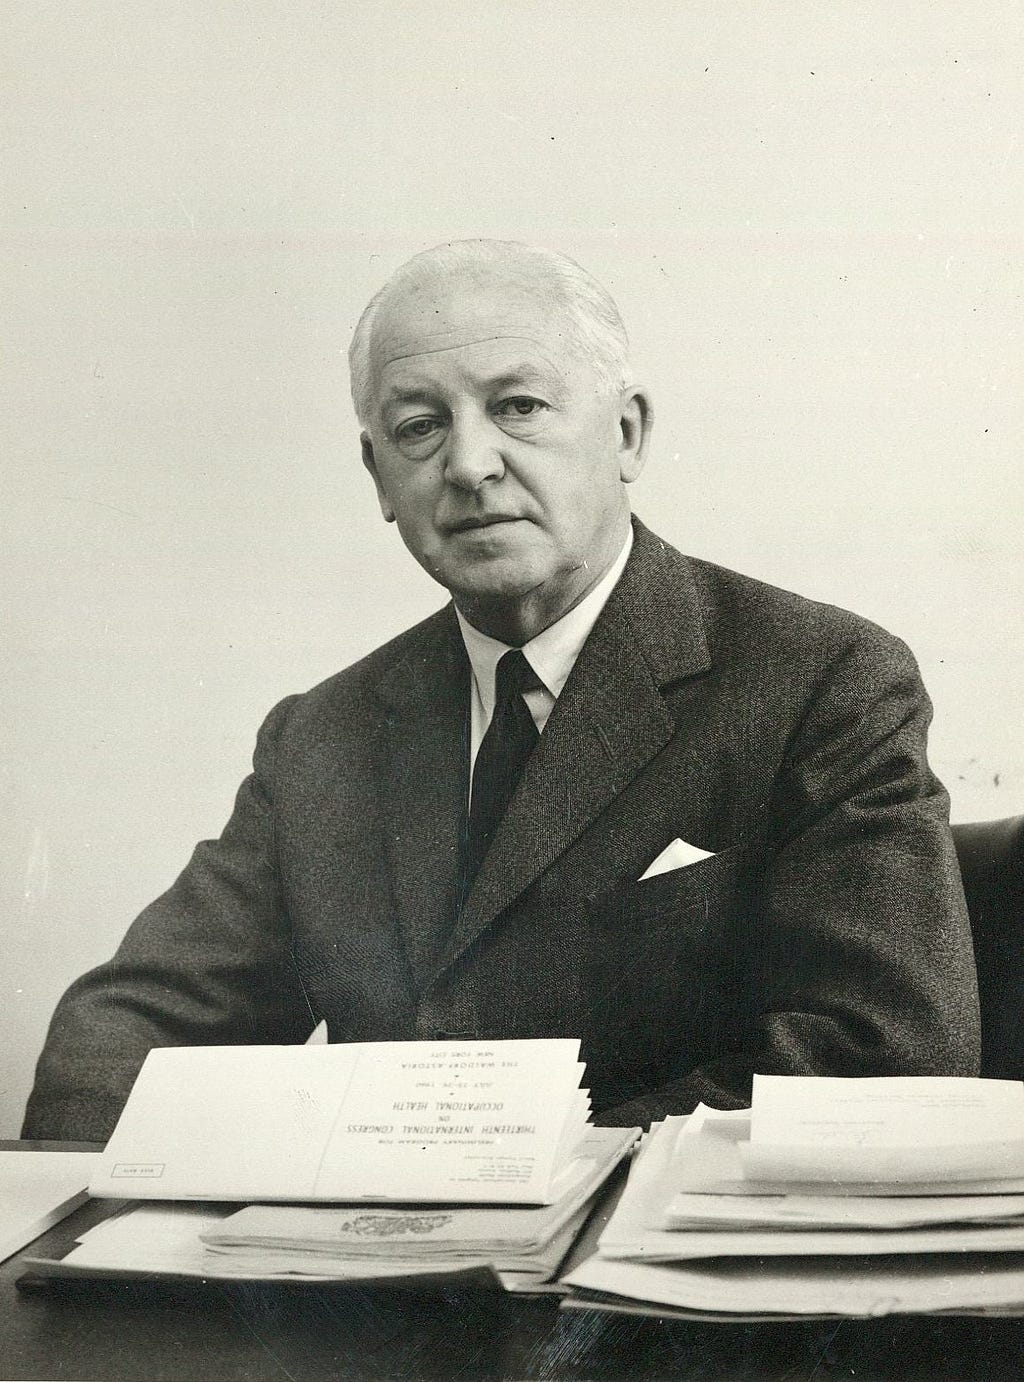 Black-and-white photograph of Ronald Lane, seated, with papers spread out on the desk in front of him